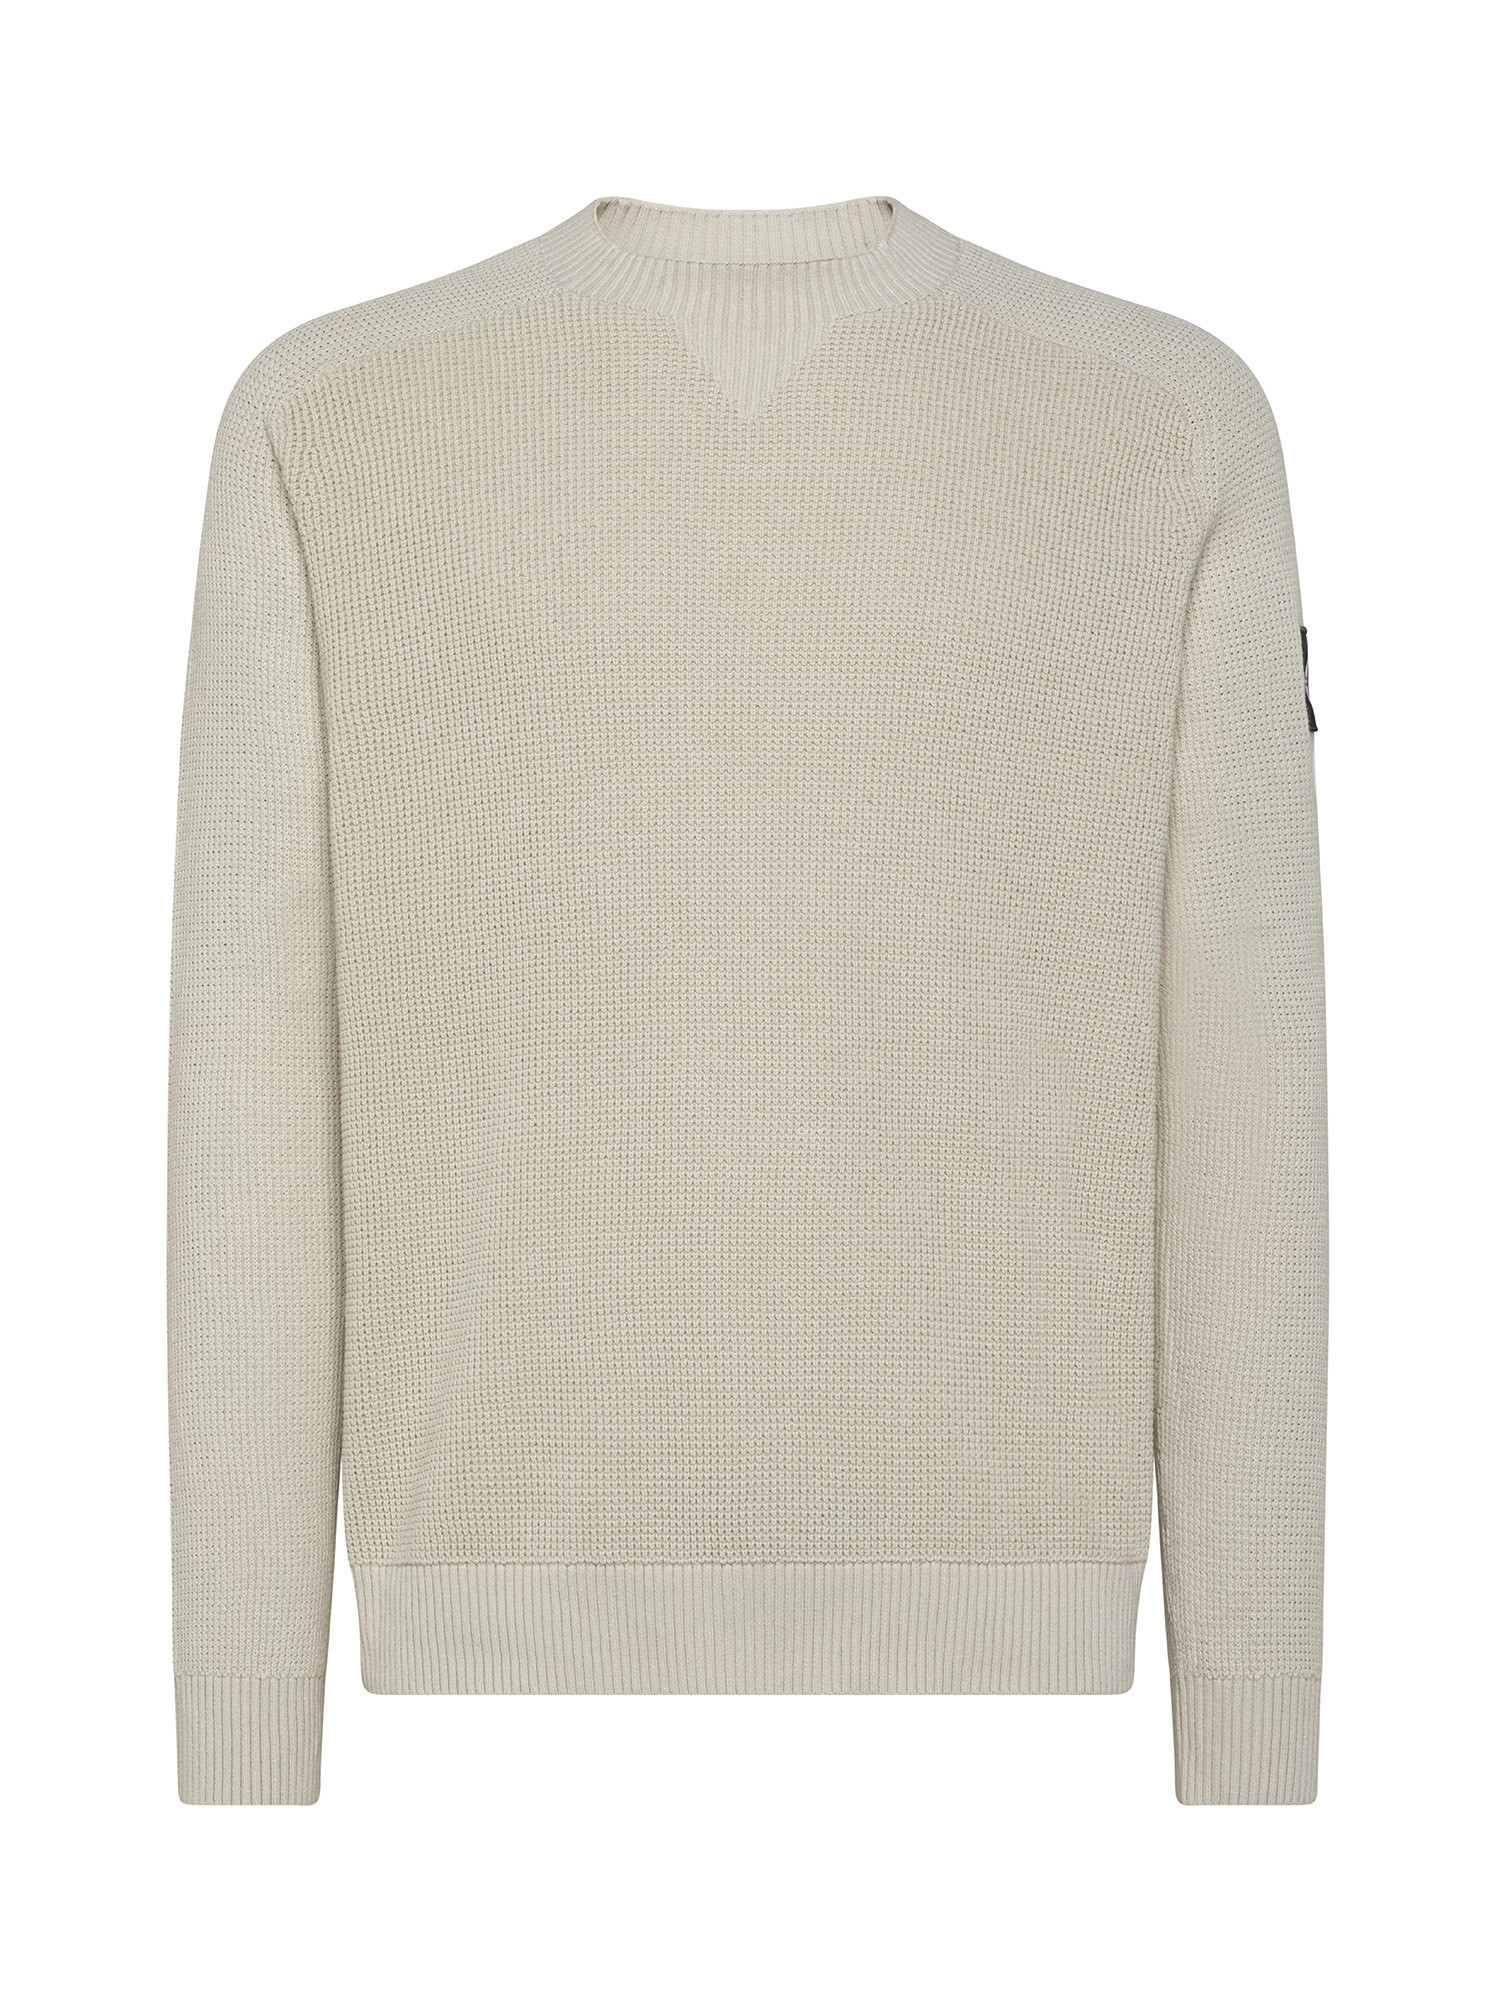 Maglione logo in cotone, Beige, large image number 0